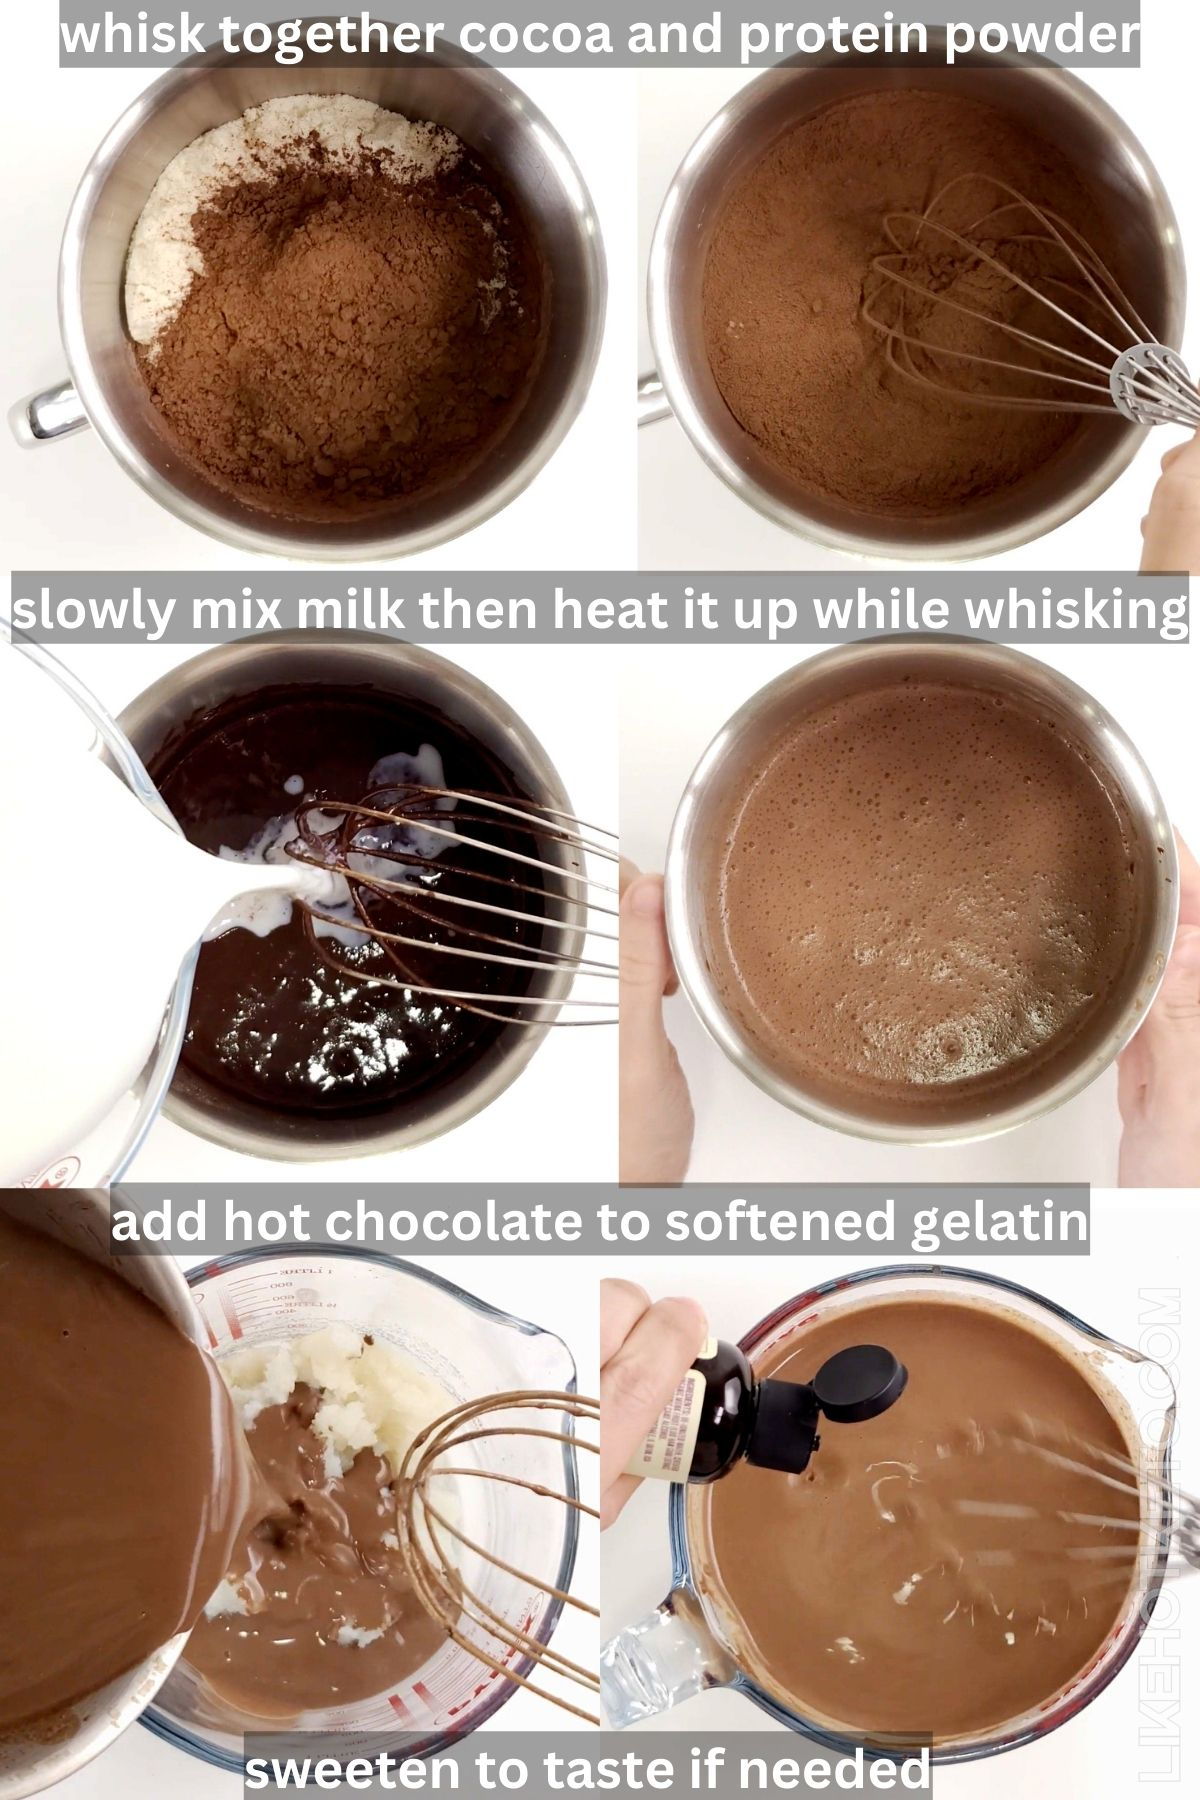 How to make chocolate jello steps: Mixing dry ingredients, adding milk, pouring the hot chocolate protein mixture over the softened gelatin, and adding monk fruit sweetener drops.